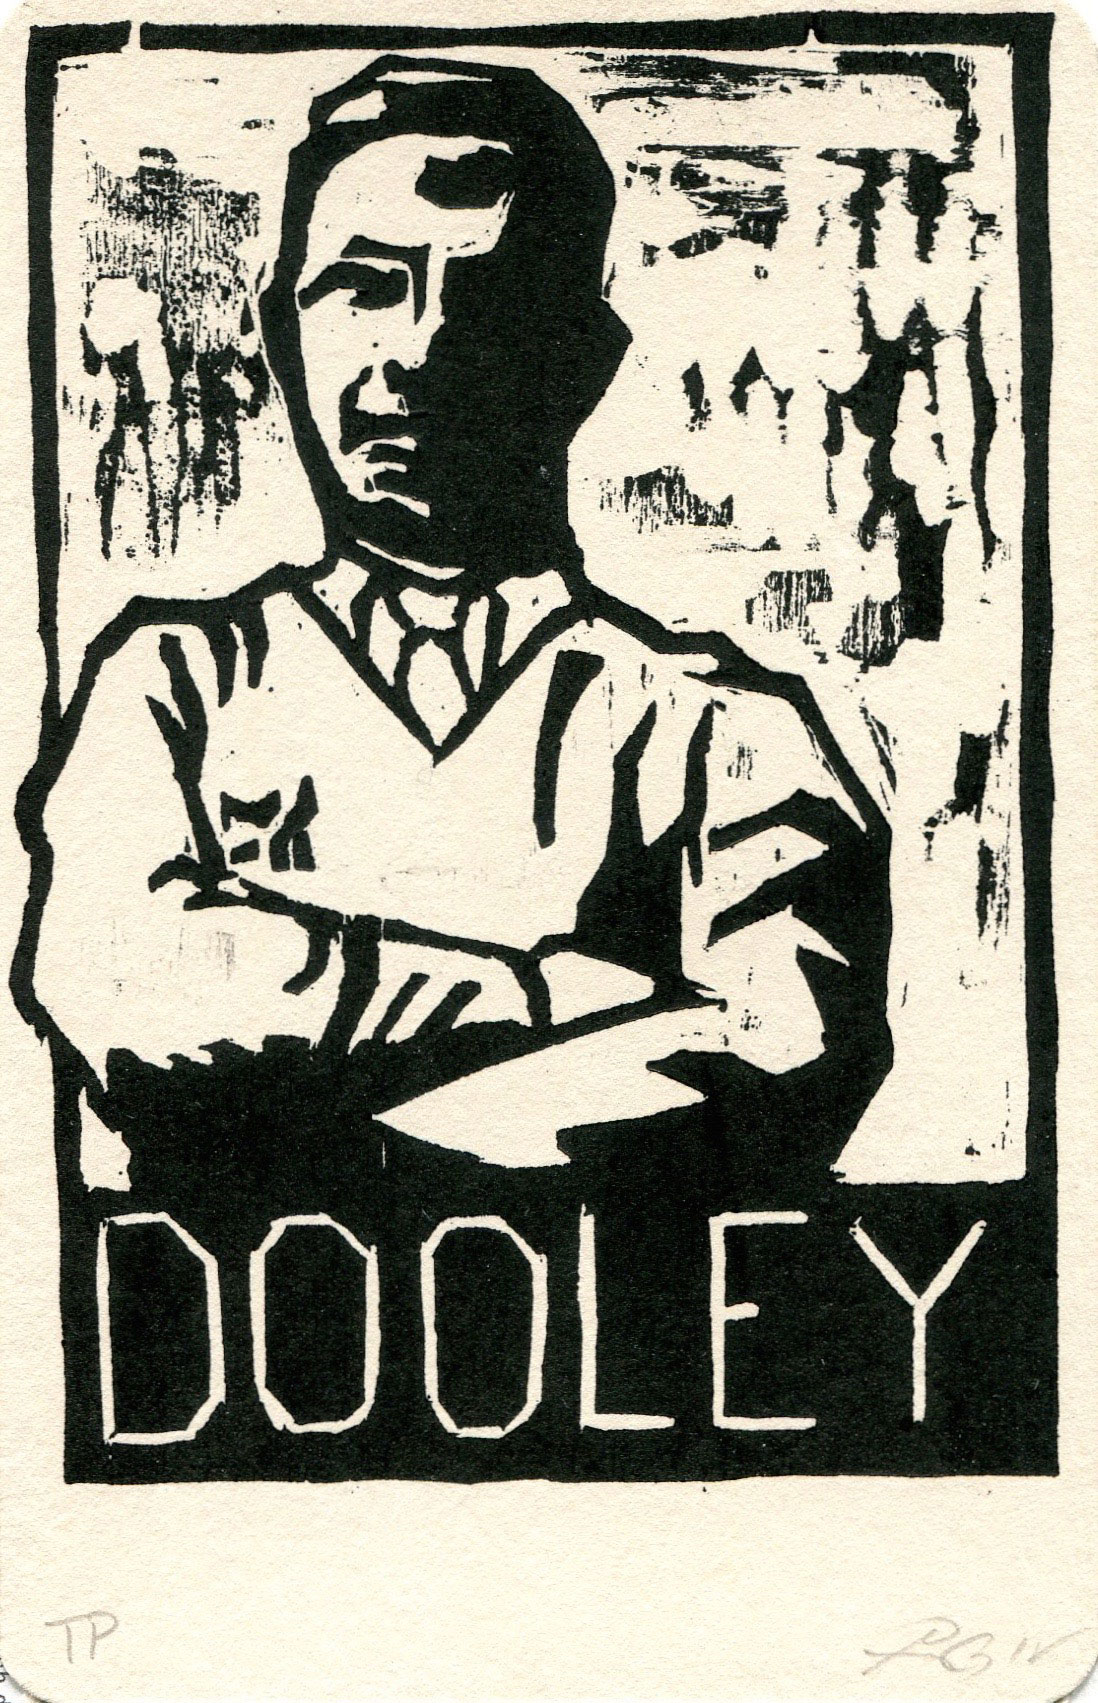 Dooley, Heroes of the Southland 2016, 3.75”x5.75”